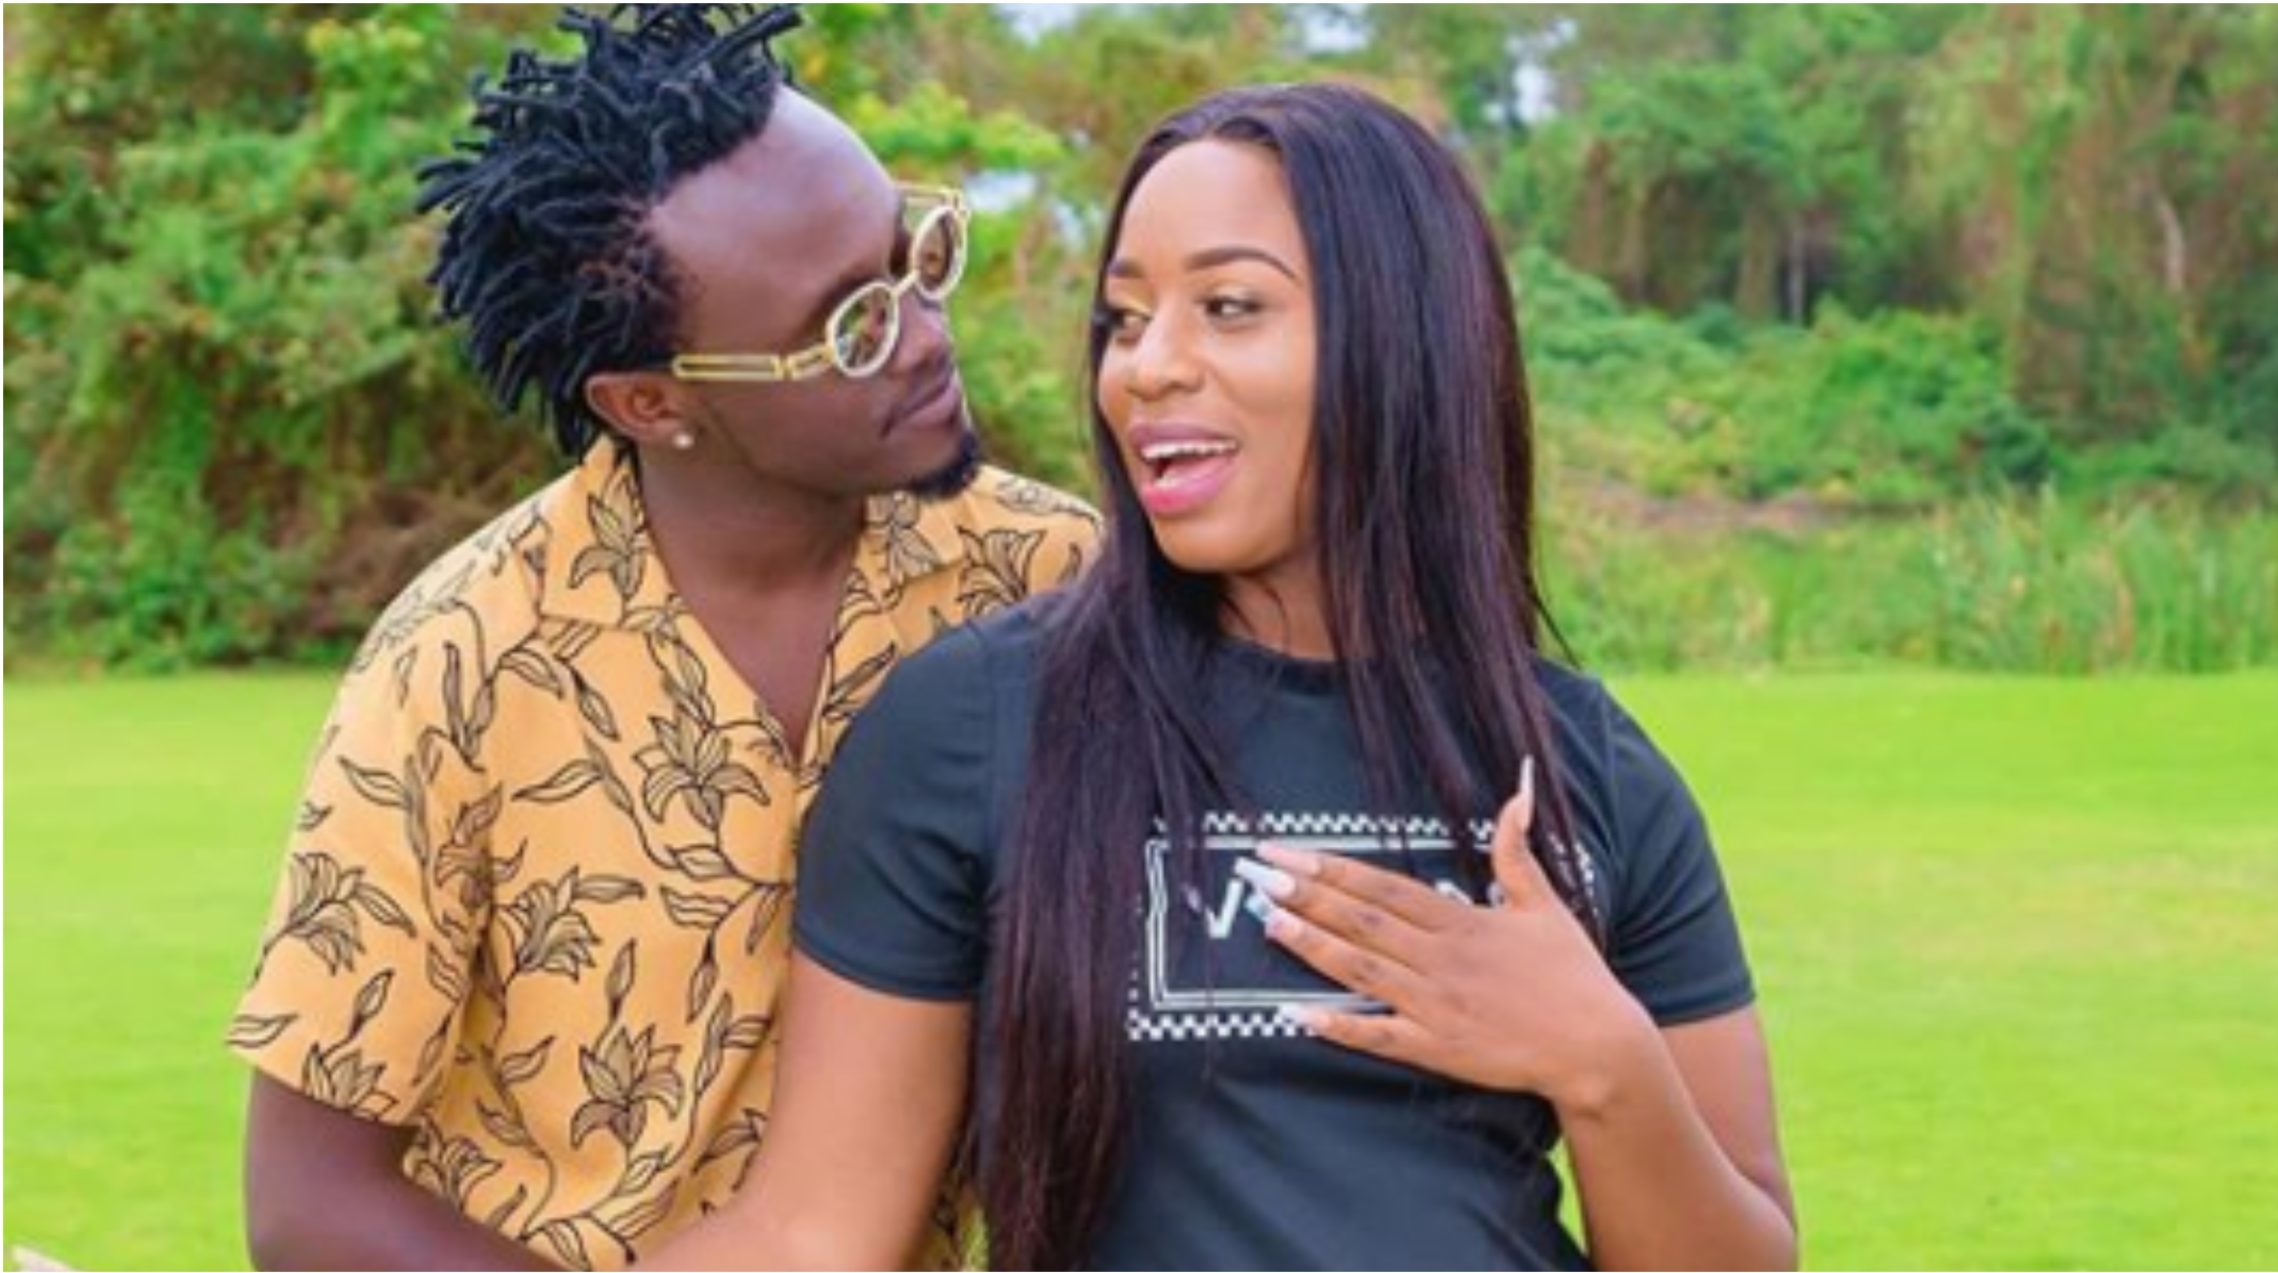 Another one for the Bahati’s? Diana Bahati sparks pregnancy rumours with skintight dress